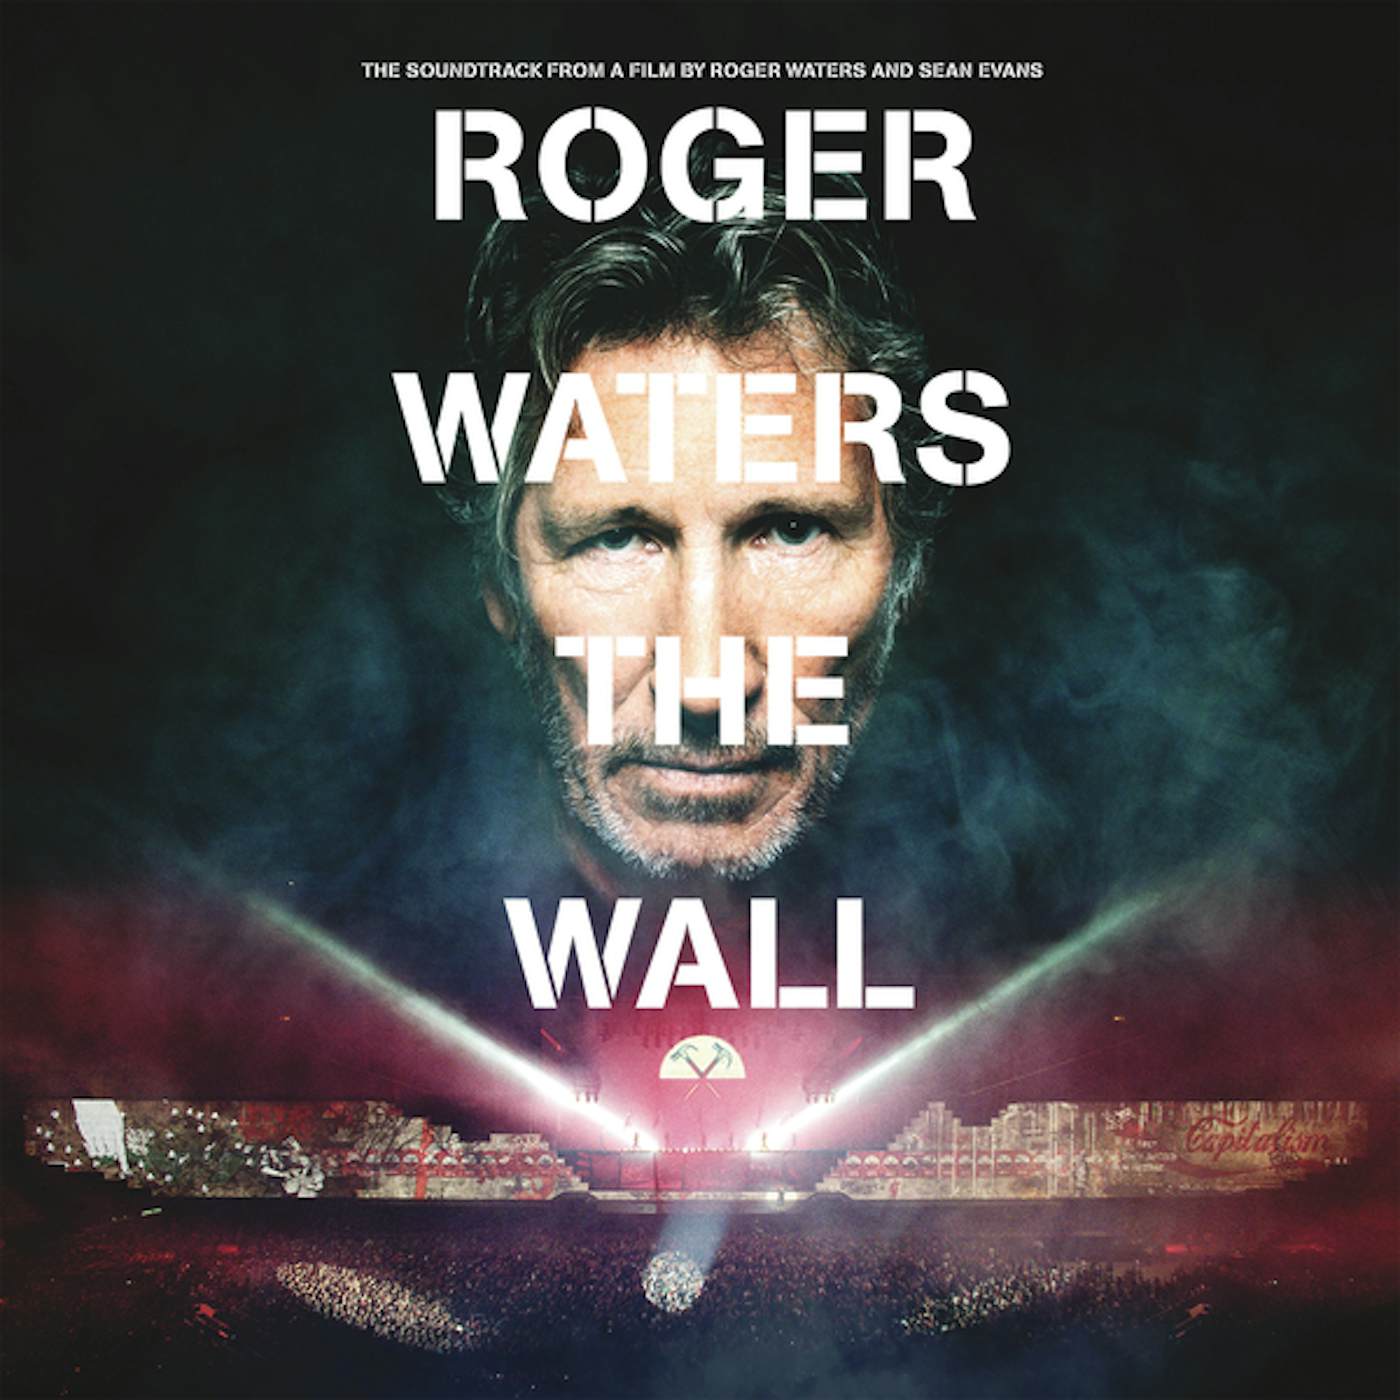 ROGER WATERS THE WALL (3LP/180G/GATEFOLD) Vinyl Record